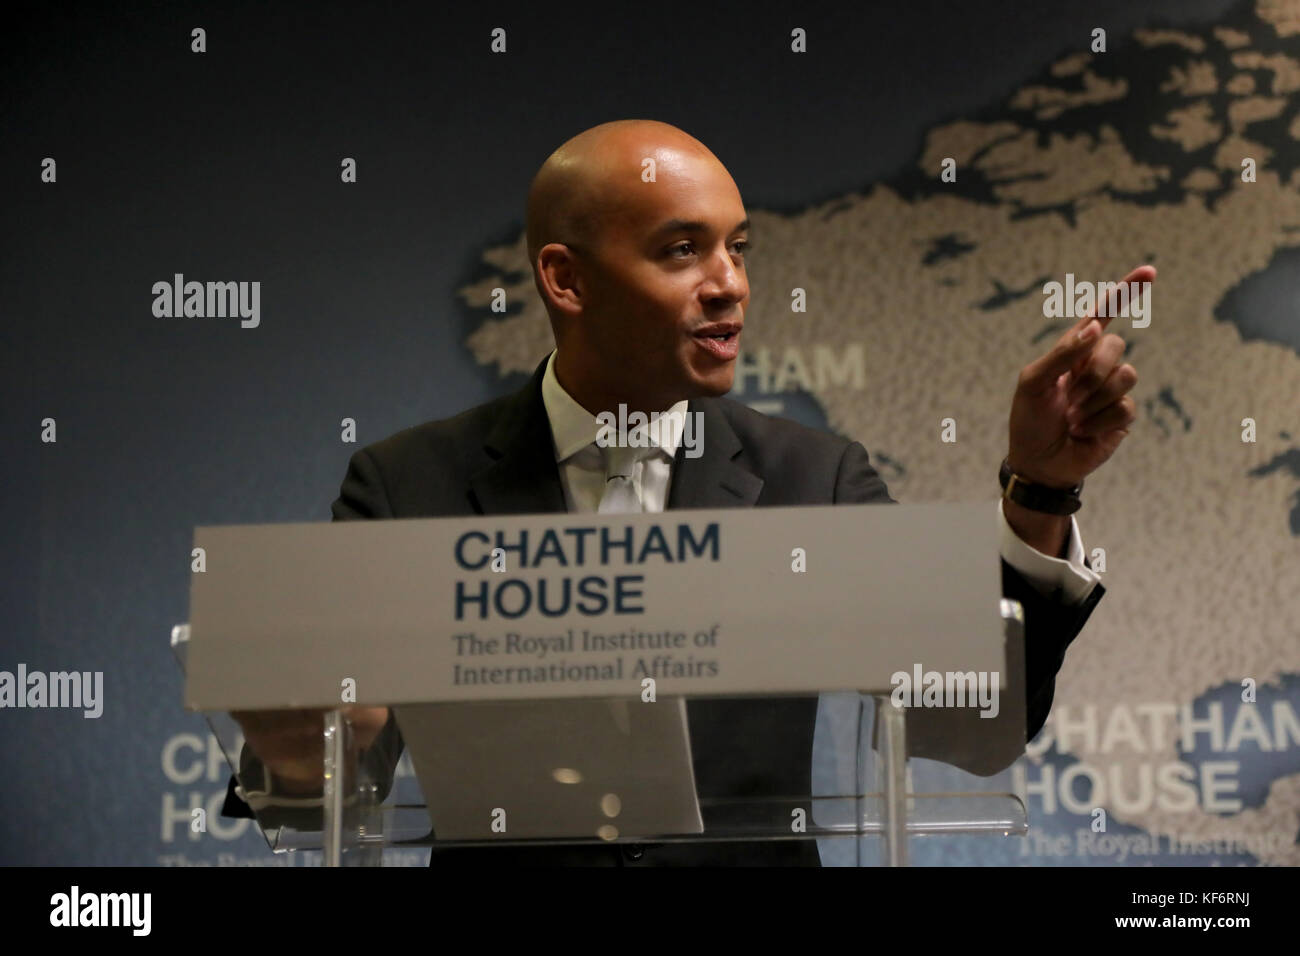 London, UK. 26th Oct, 2017. Chuka Umunna, Labour party MP and chair of Vote Leave Watch, speaking on the international role for the UK following the Brexit vote, at the Chatham House think-tank in London on 26 October 2017. Credit: Dominic Dudley/Alamy Live News Stock Photo